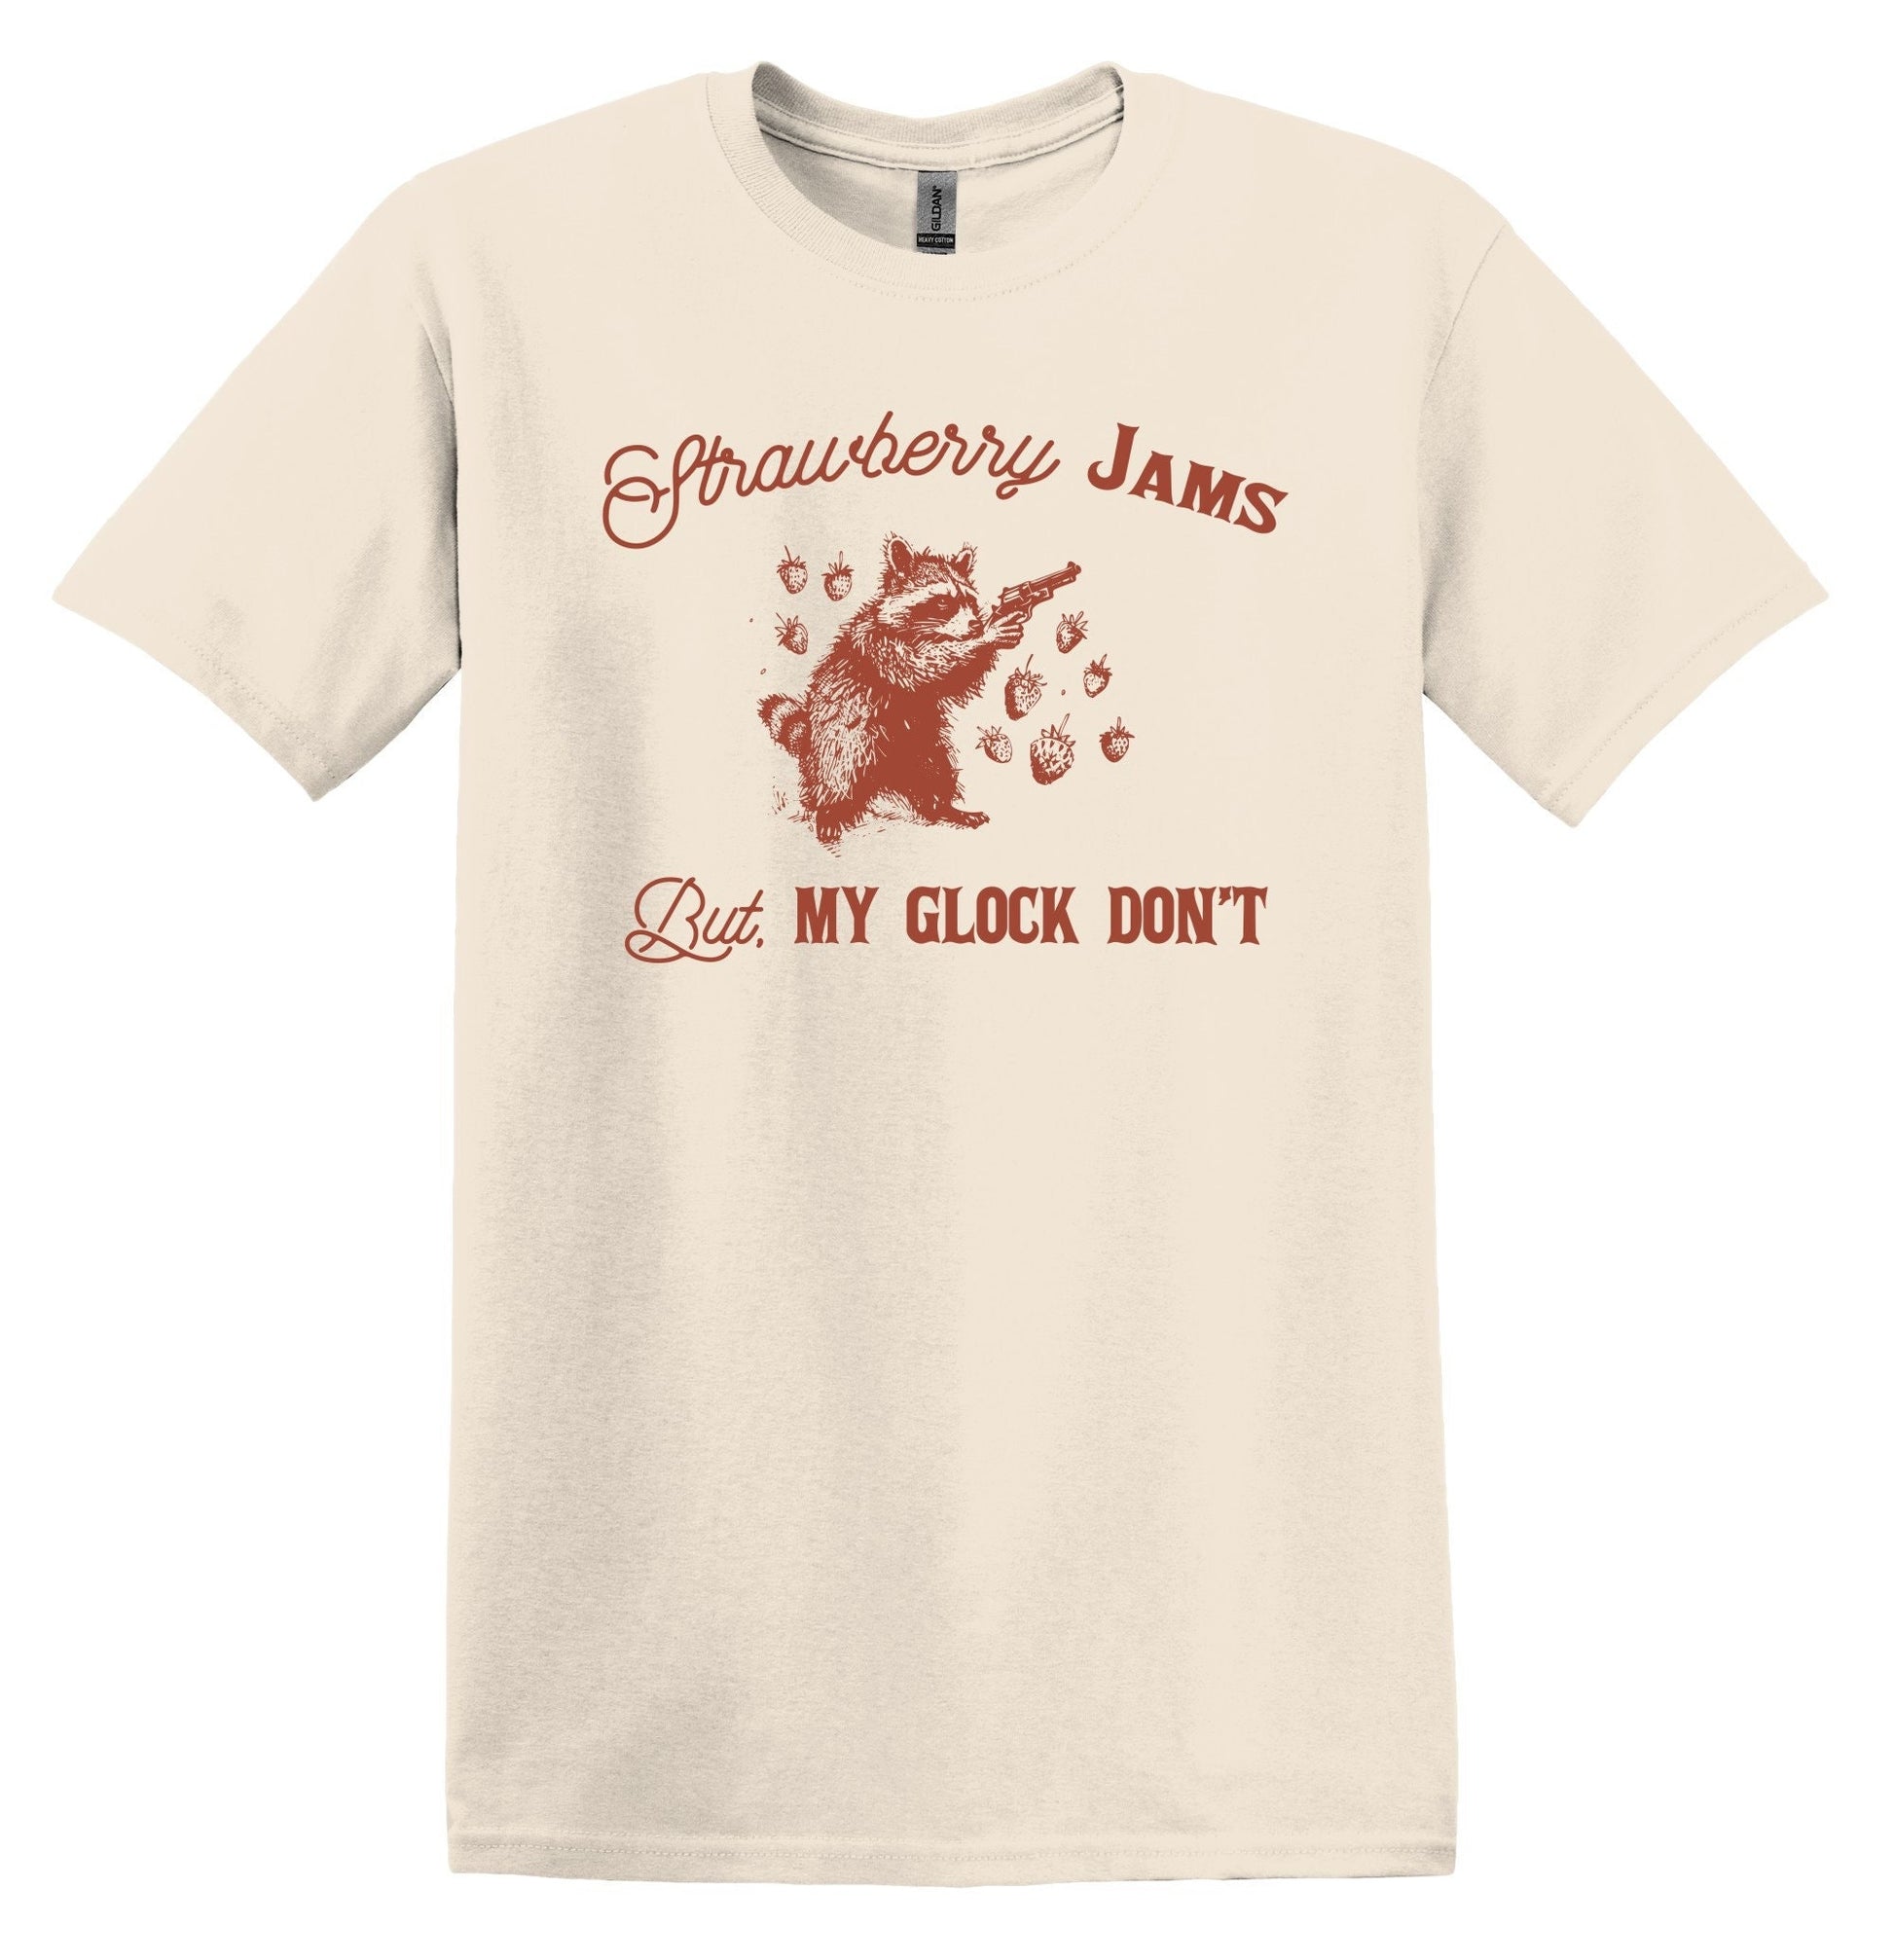 Strawberry Jams But My Glock Don't Raccoon Shirt - Funny Graphic Tee